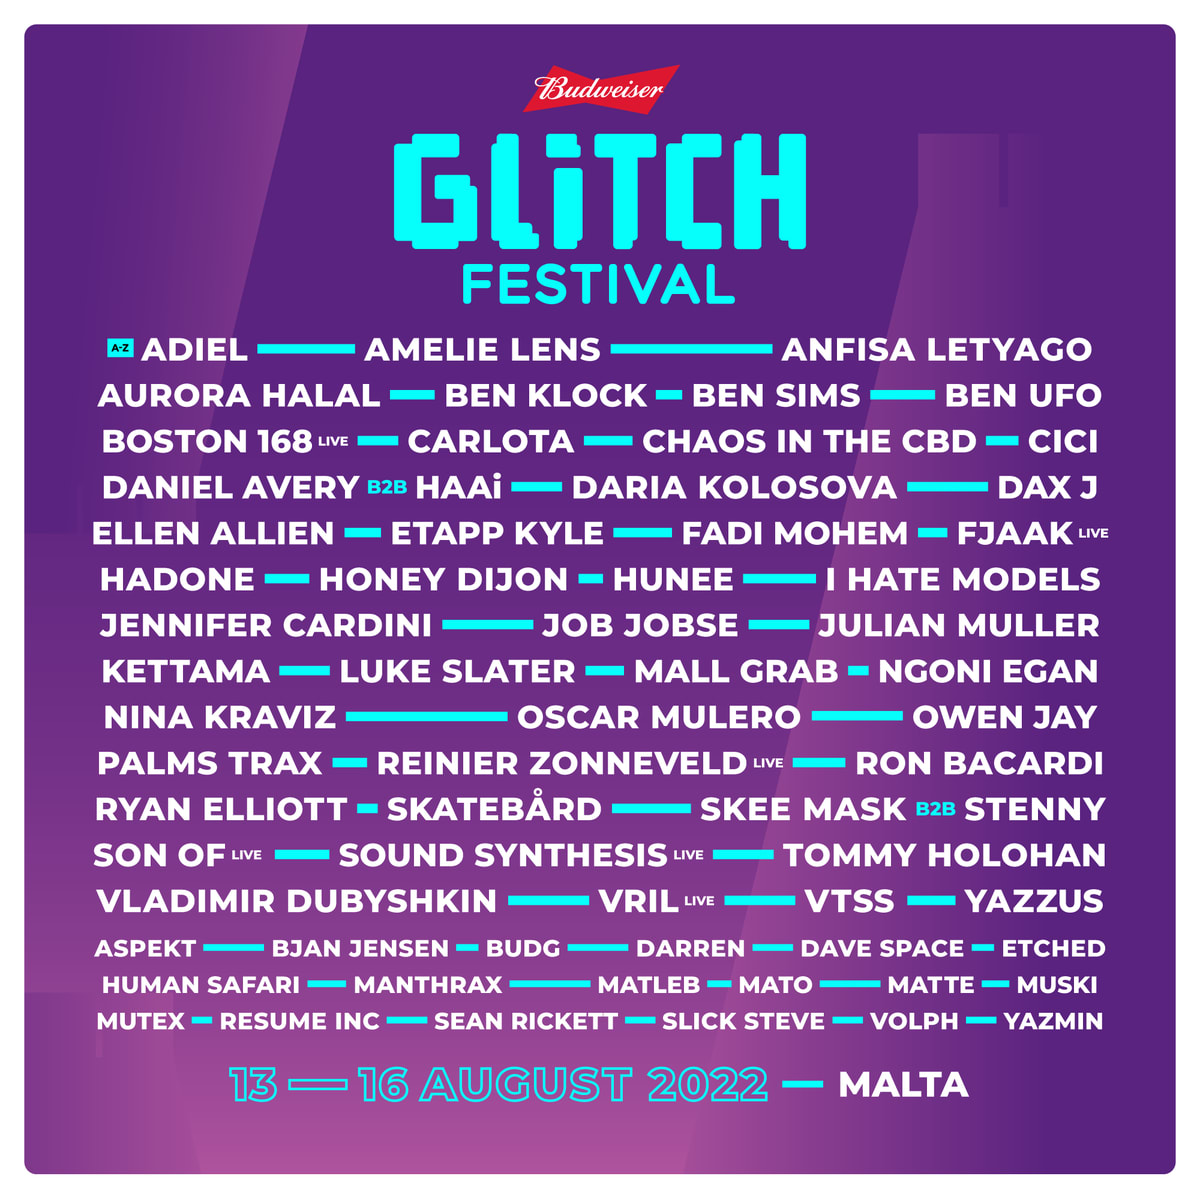 Following a 2yr hiatus in the shape of a global pandemic, we are back on the idyllic archipelago of Malta this summer to celebrate our return to Glitch Festival. More info to come, inc. who'll be playing our stage. Buy tickets ⤳